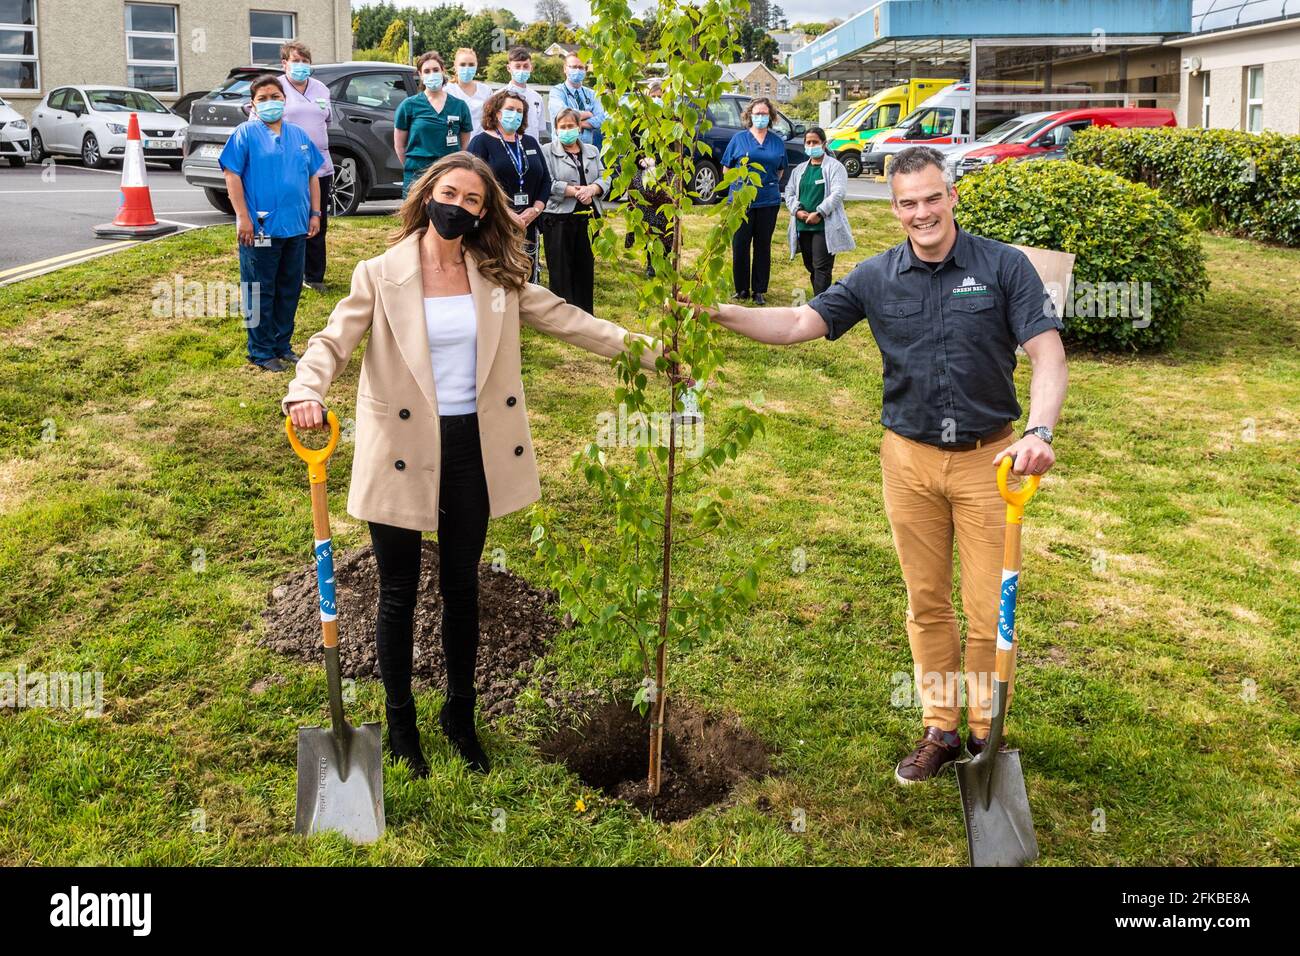 Bantry, West Cork, Ireland. 30th Apr, 2021. Holly Cairns TD planted a birch and oak tree at Bantry General Hospital today as part of the 'Nurse a Tree' initiative. Nurse a Tree plans to plant a tree for every healthcare worker in Ireland, which amounts to 80,000, as a living legacy. Assisting Holly with the planting of a birch tree is Maurice Ryan, Director of Green Belt LTD with Bantry Hospital Nurses watching on. Credit: AG News/Alamy Live News Stock Photo